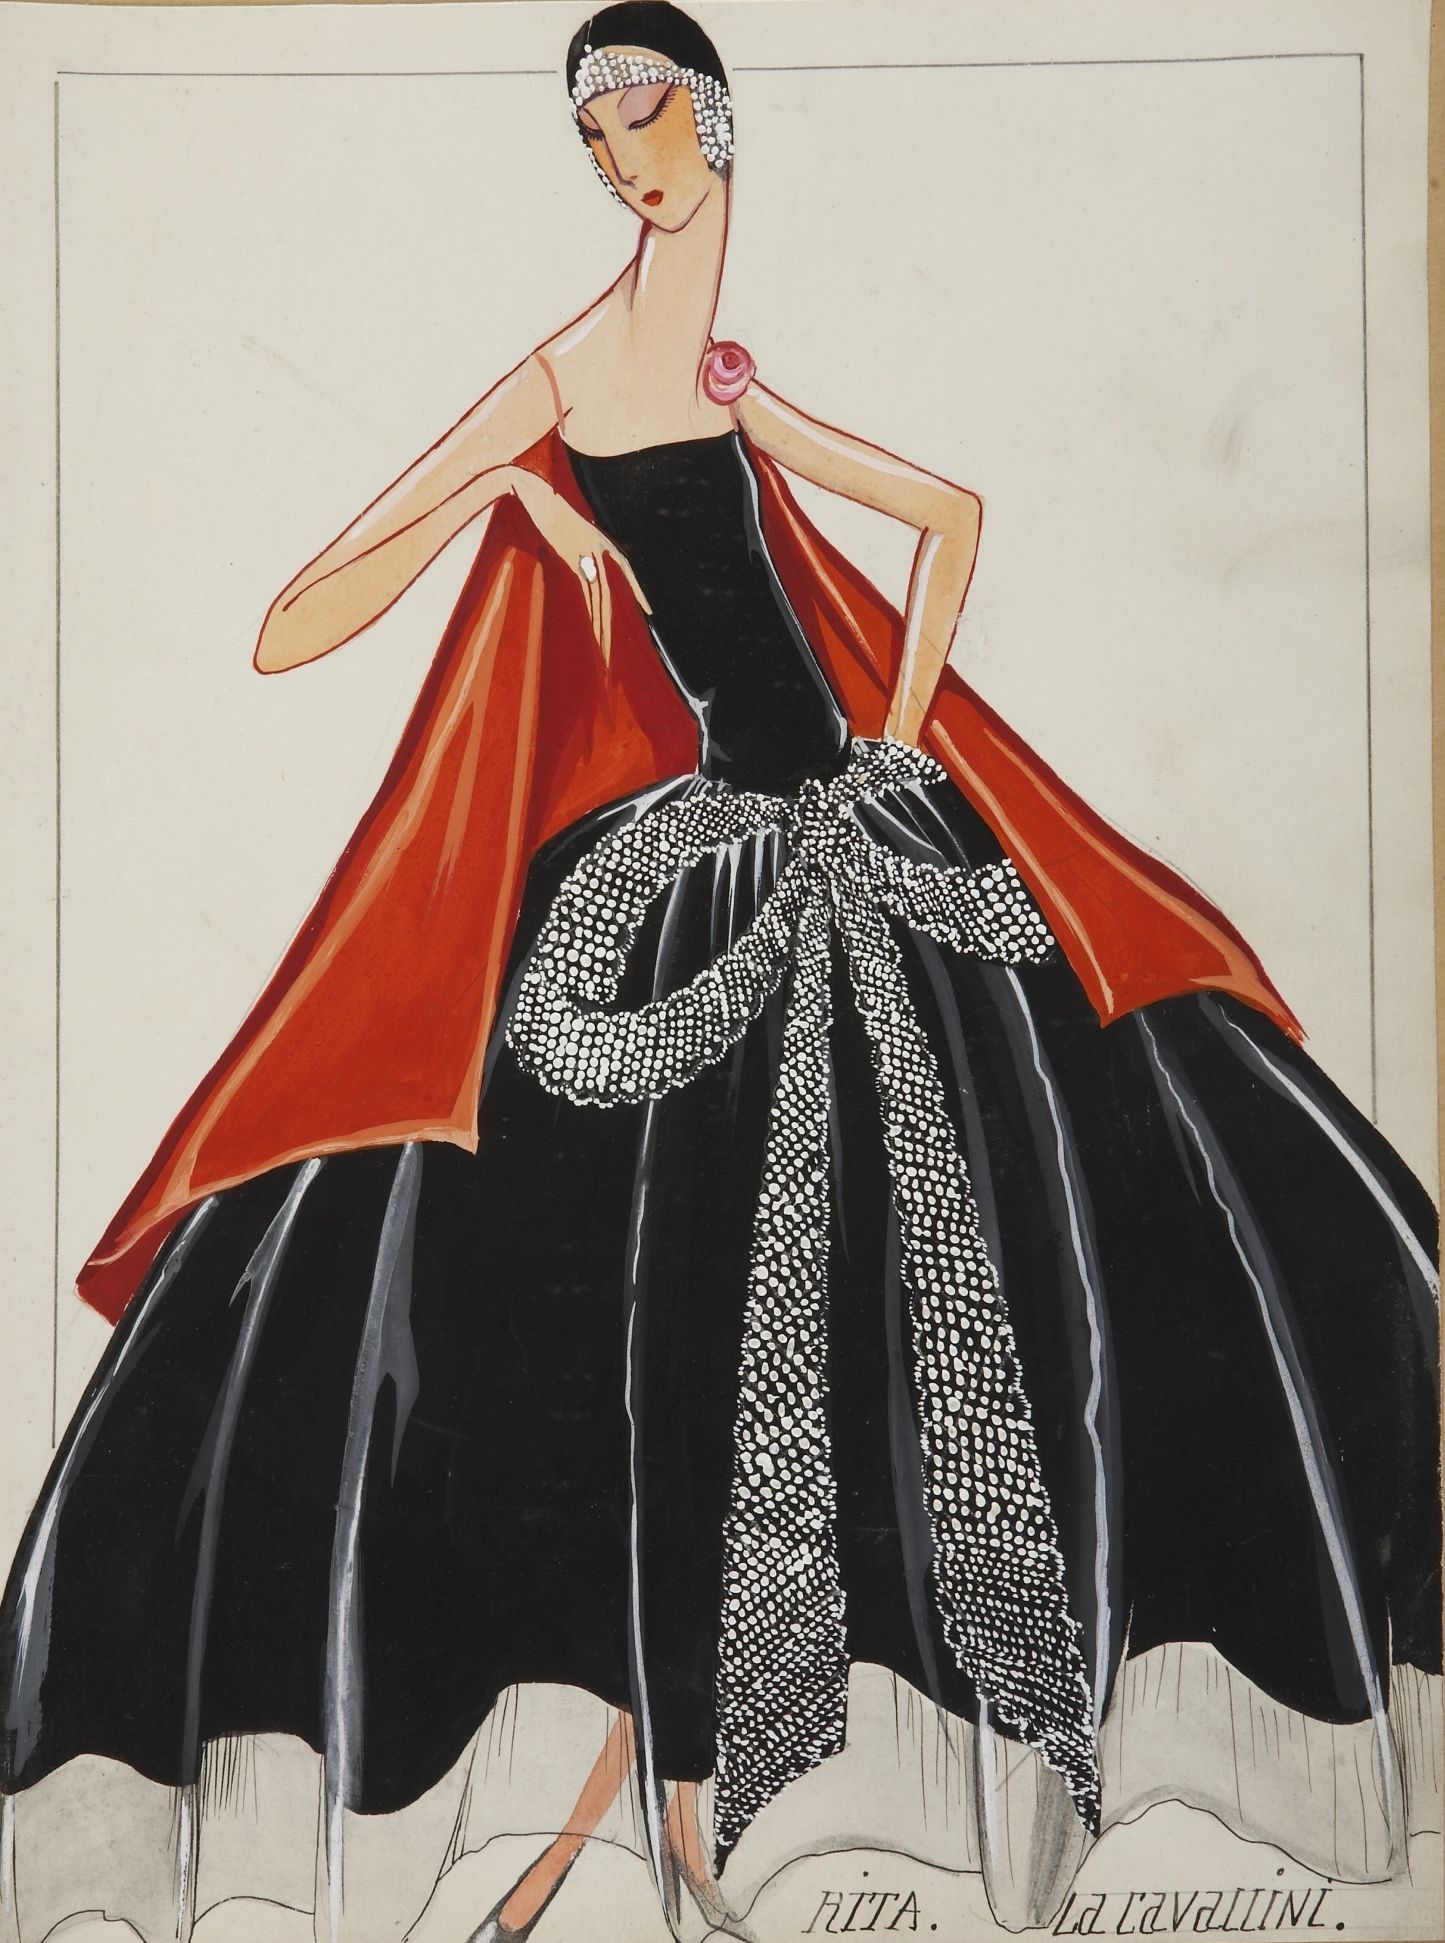 SWAROVSKI PAYS HOMMAGE TO JEANNE LANVIN AT THE MUSEE GALLIERA